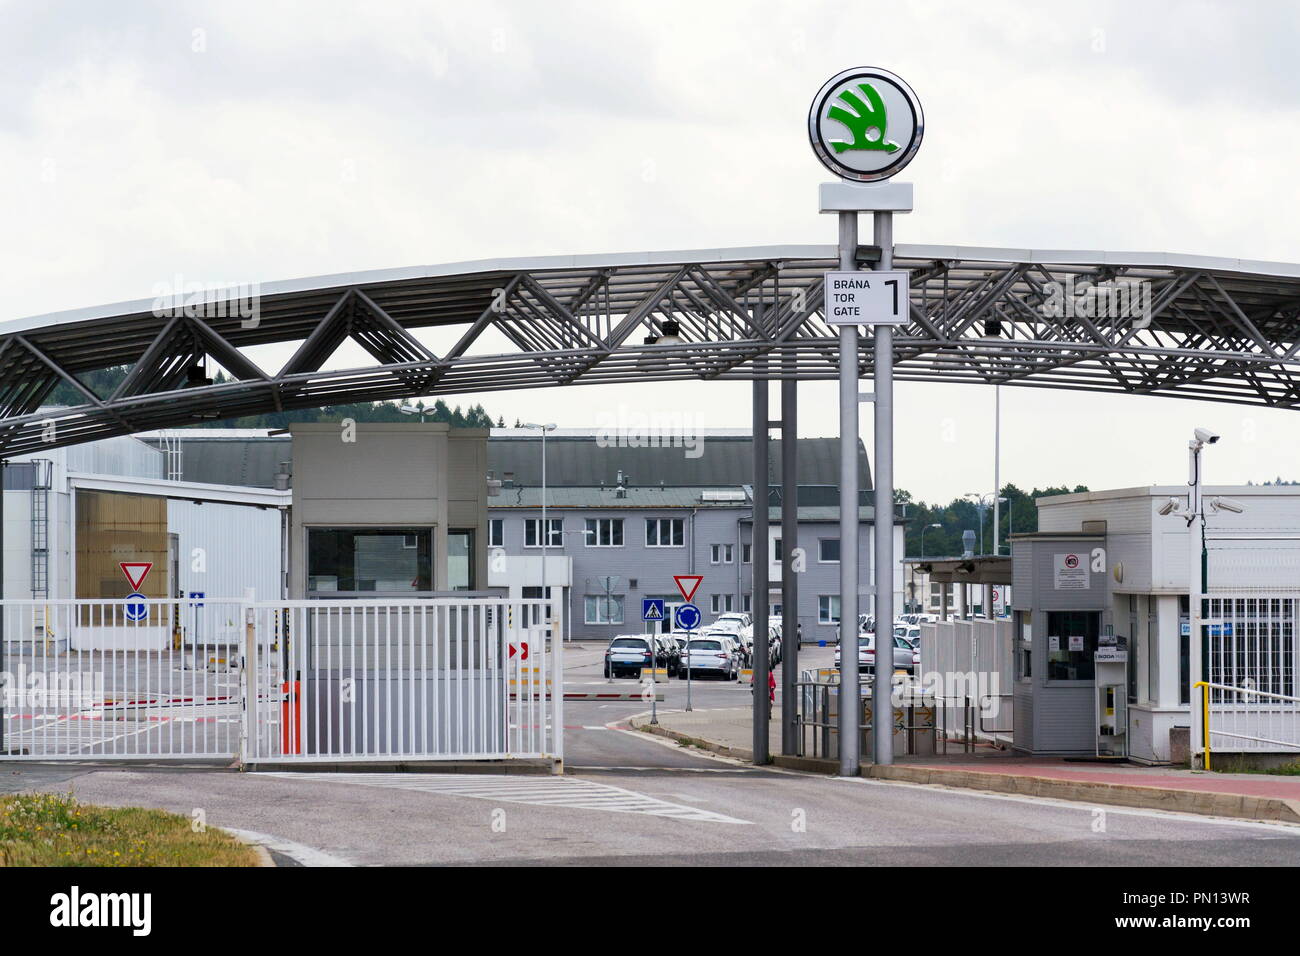 VRCHLABI, CZECH REPUBLIC - AUGUST 25 2018: Skoda Auto automobile manufacturer from Volkswagen Group company logo on plant gateway on August 25, 2018 Stock Photo